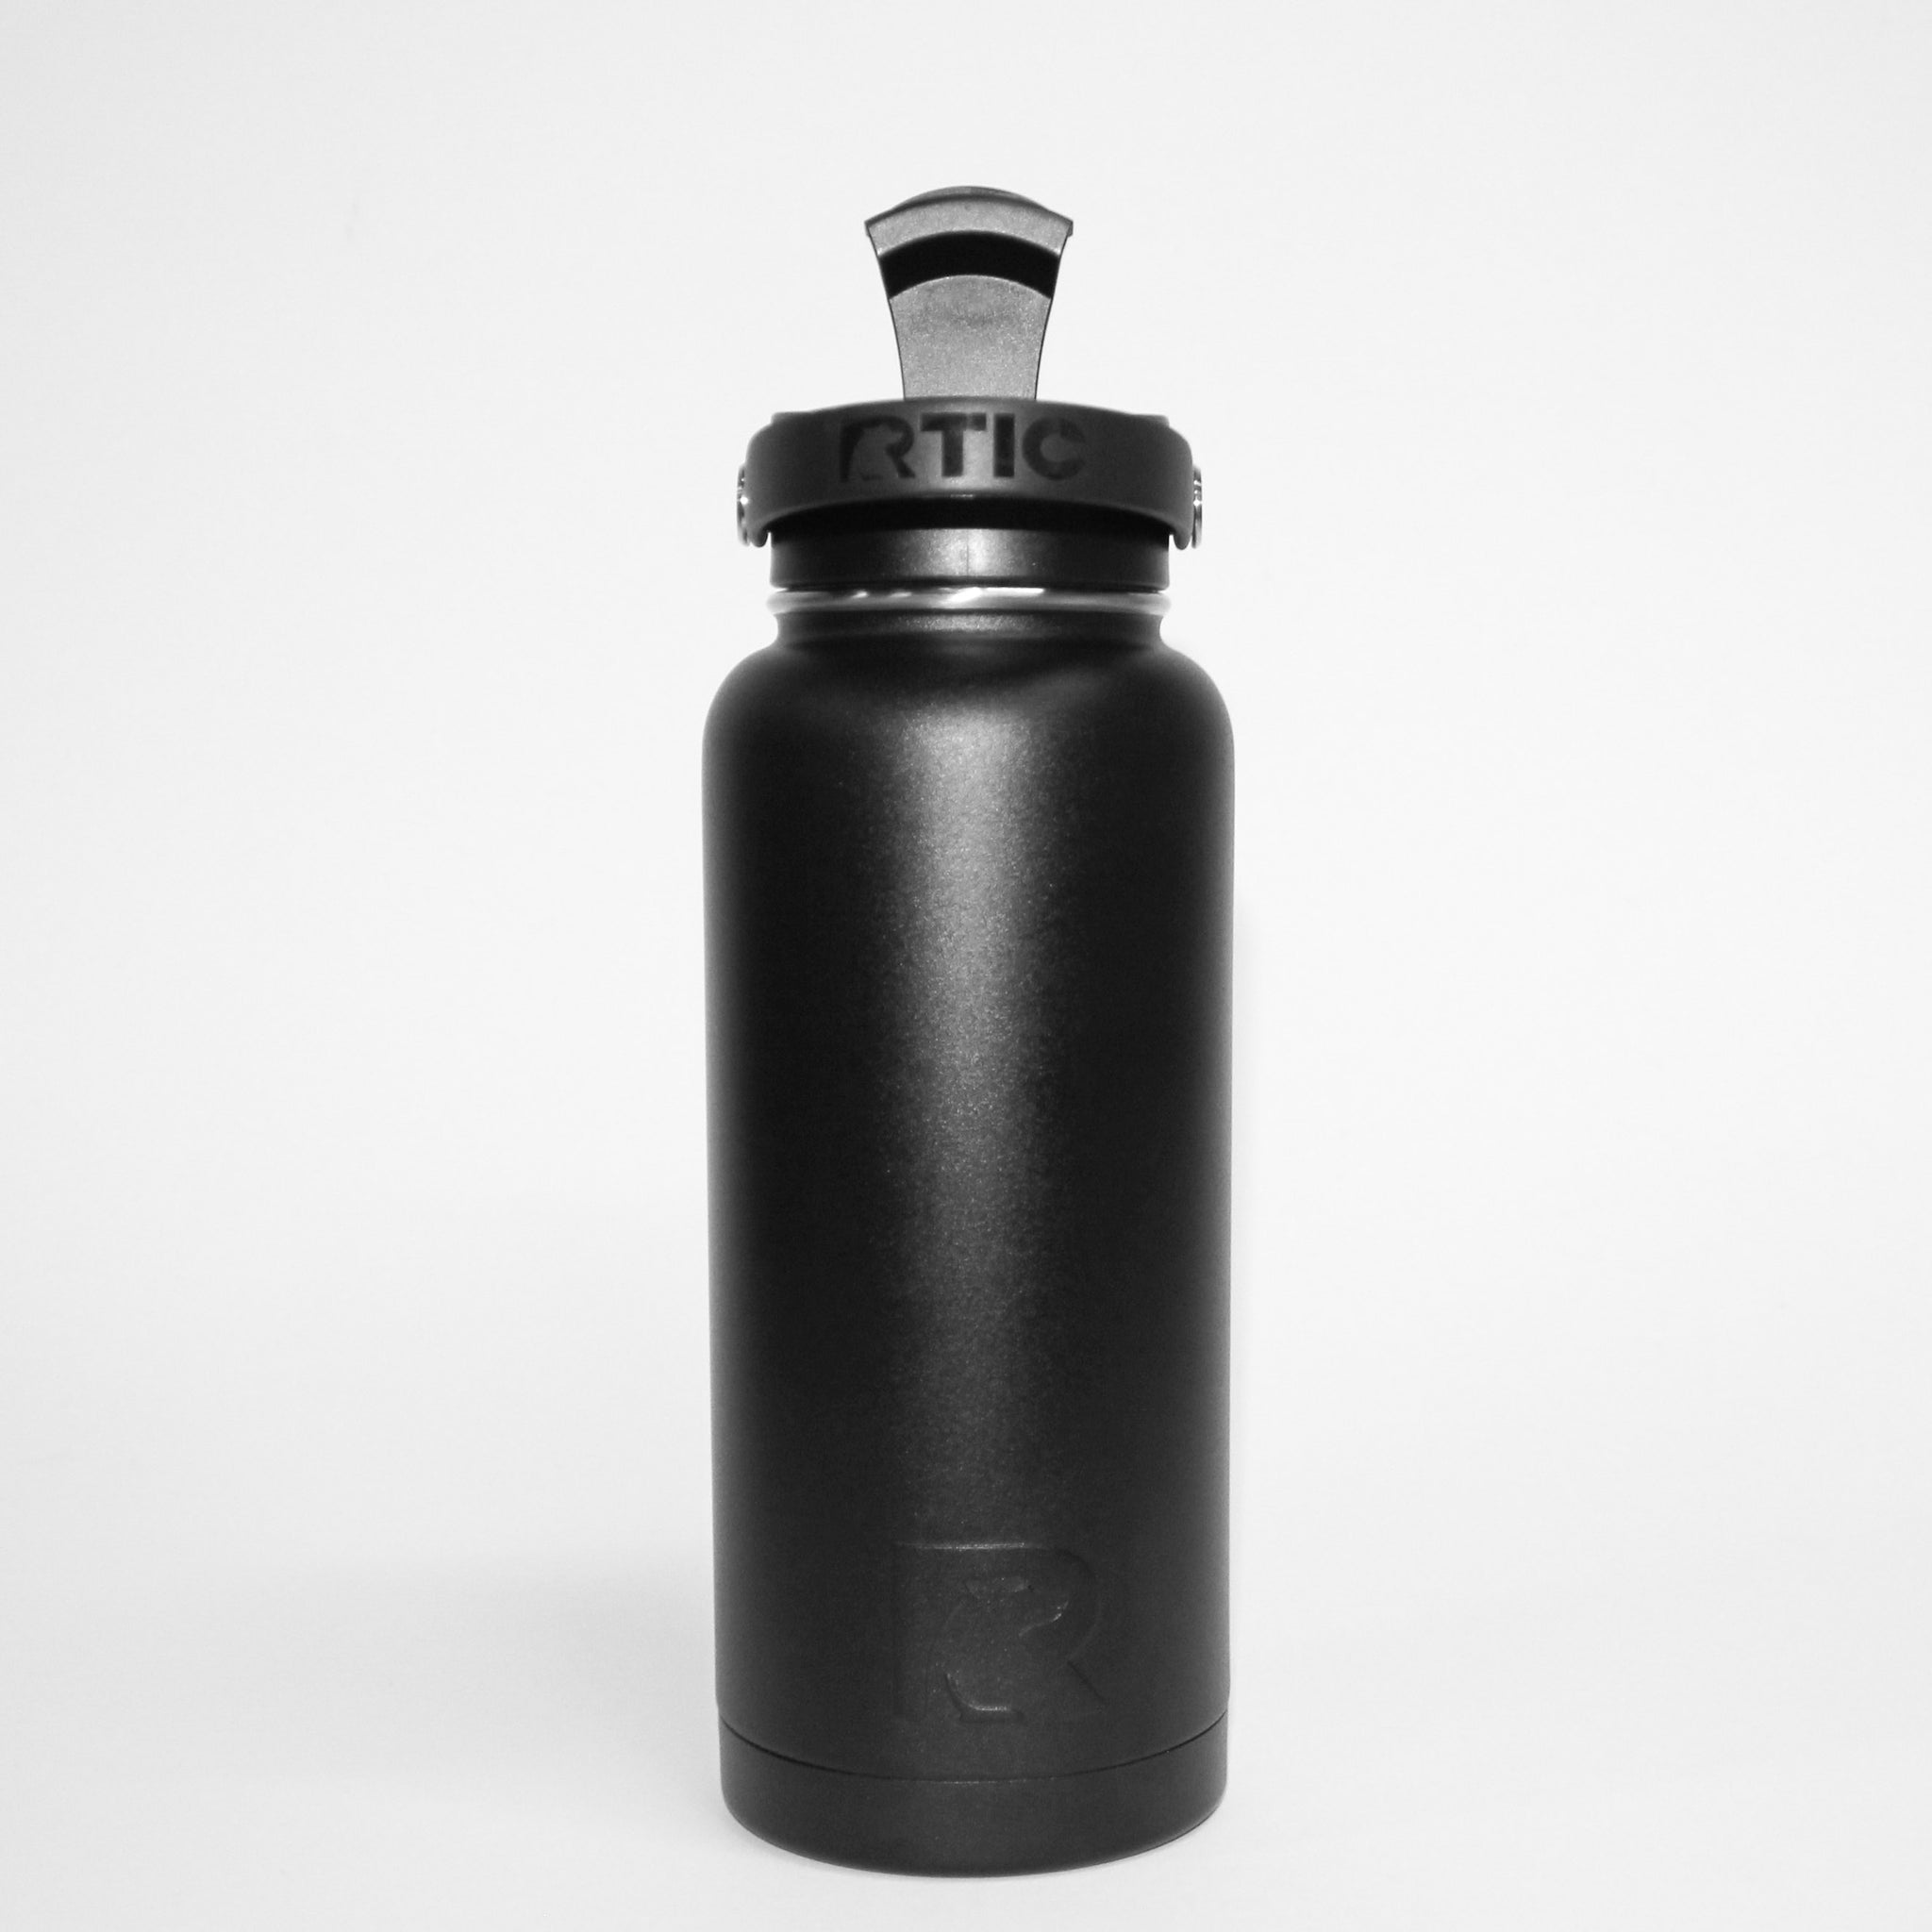 MOSSA LET'S MOVE! RTIC 32 oz. Water Bottle (Charcoal)